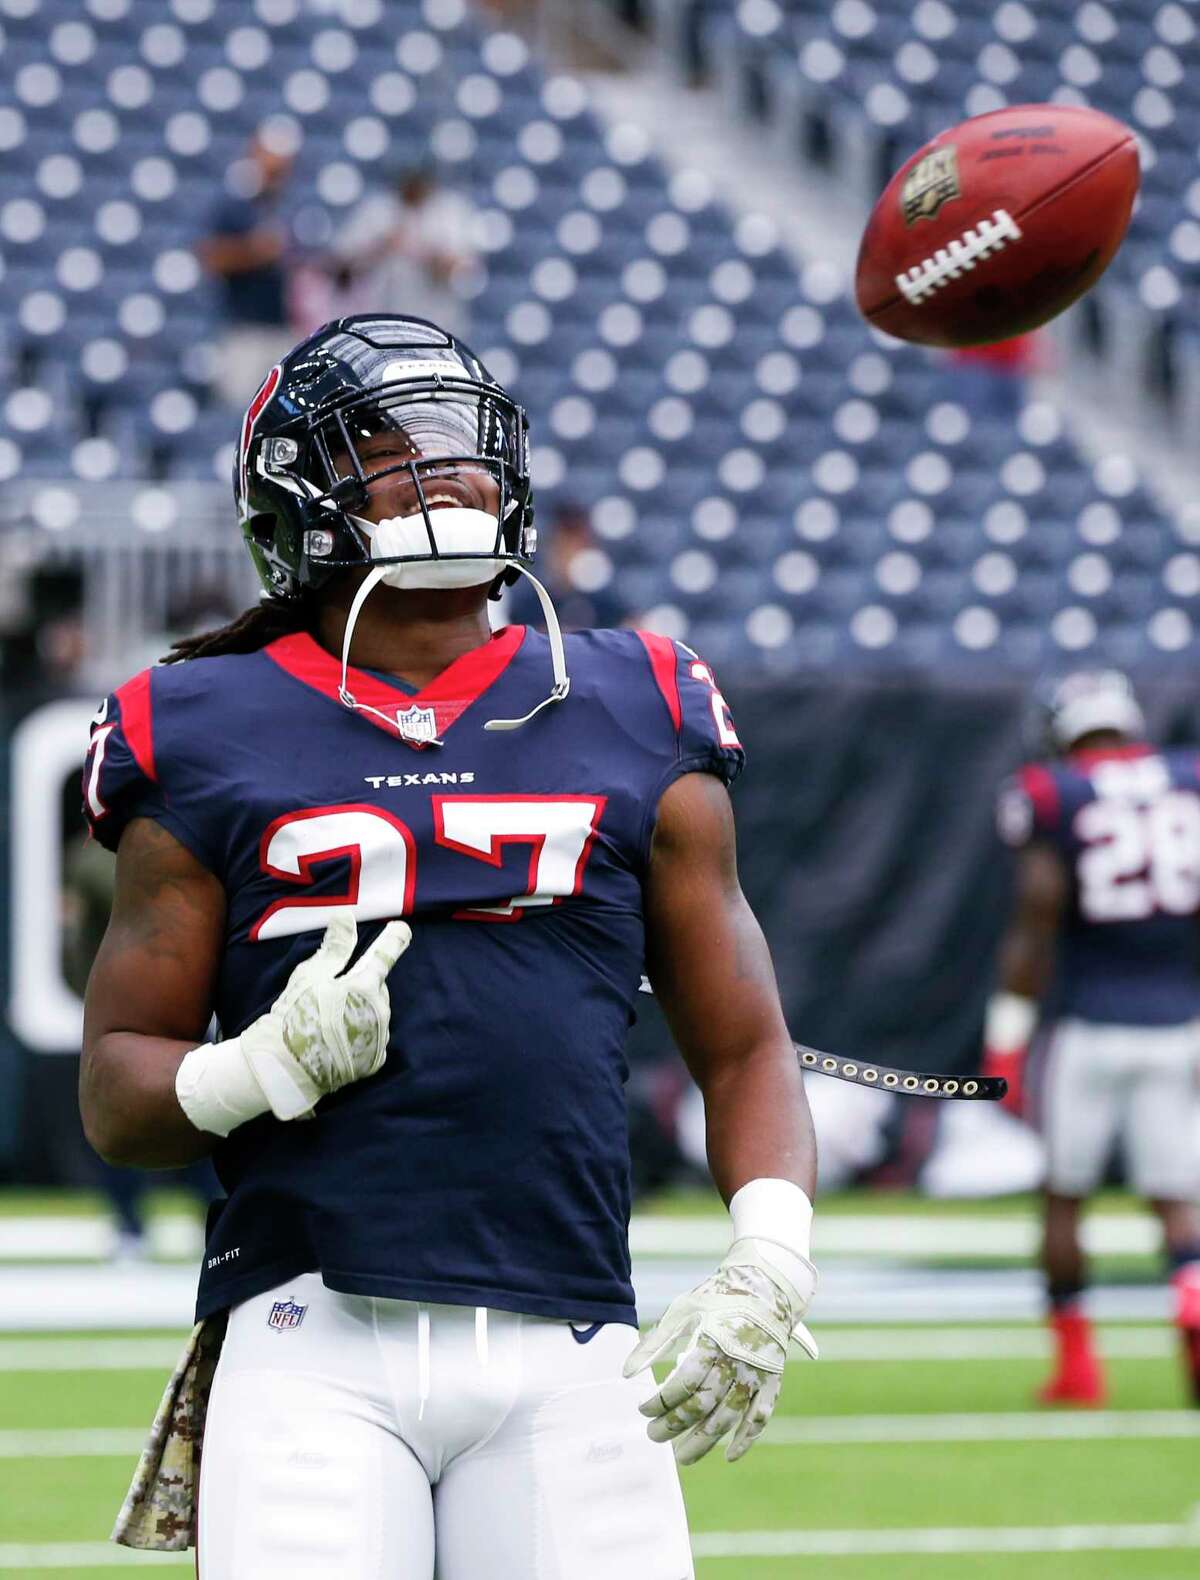 Houston Texans running back D'Onta Foreman (27) tosses a ball after catching a kick while warming up before an NFL football game at NRG Stadium on Sunday, Nov. 5, 2017, in Houston.